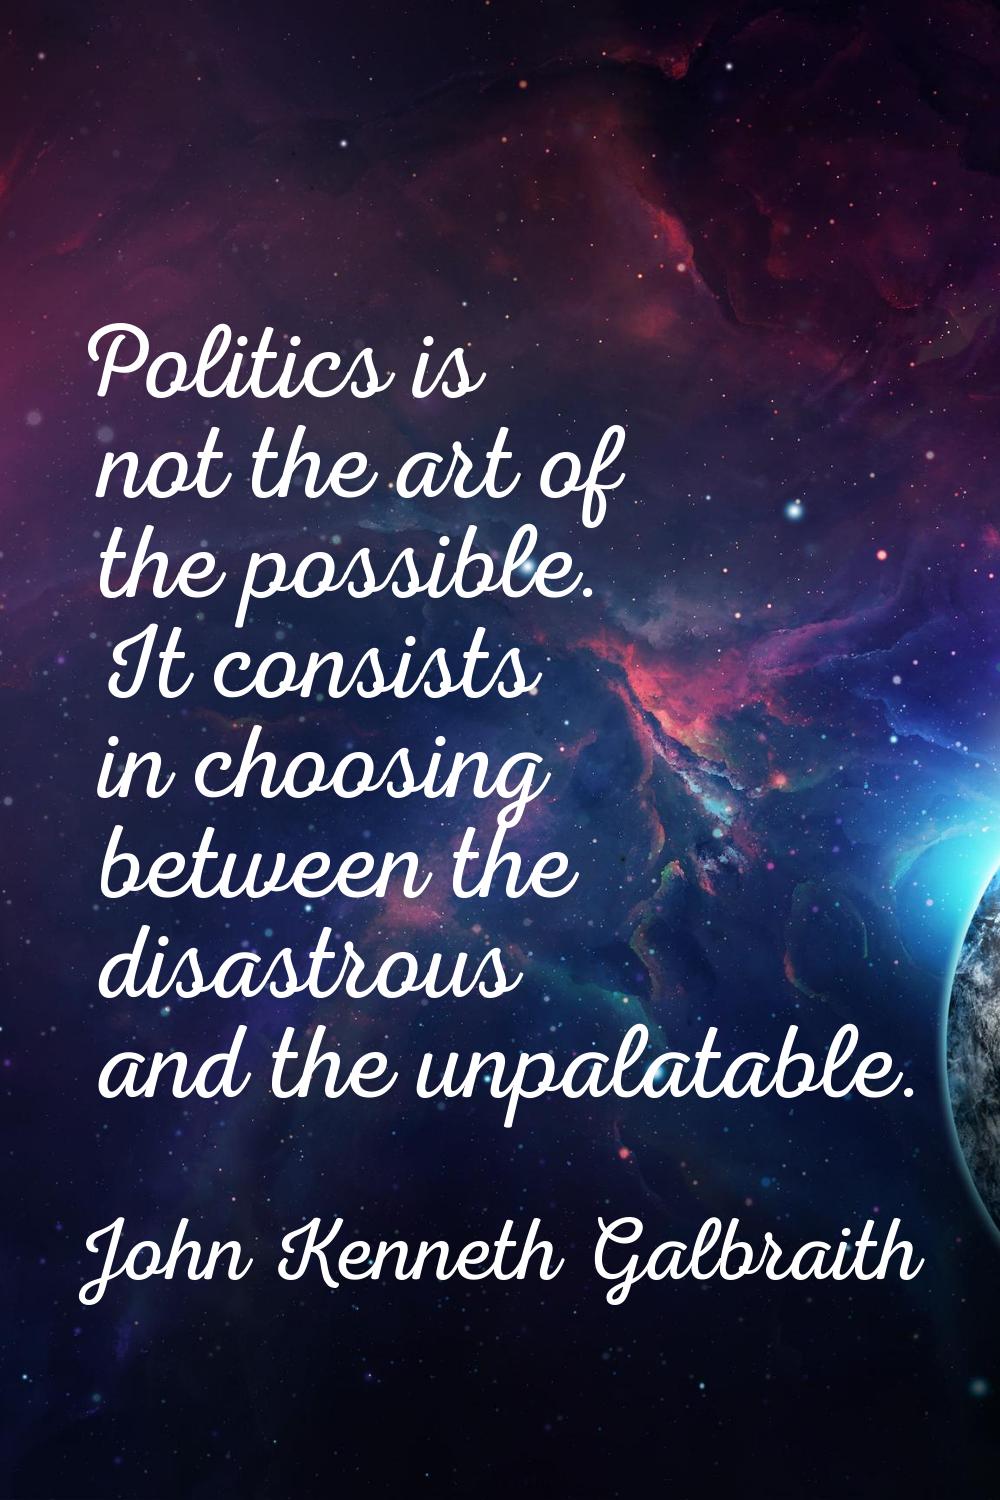 Politics is not the art of the possible. It consists in choosing between the disastrous and the unp